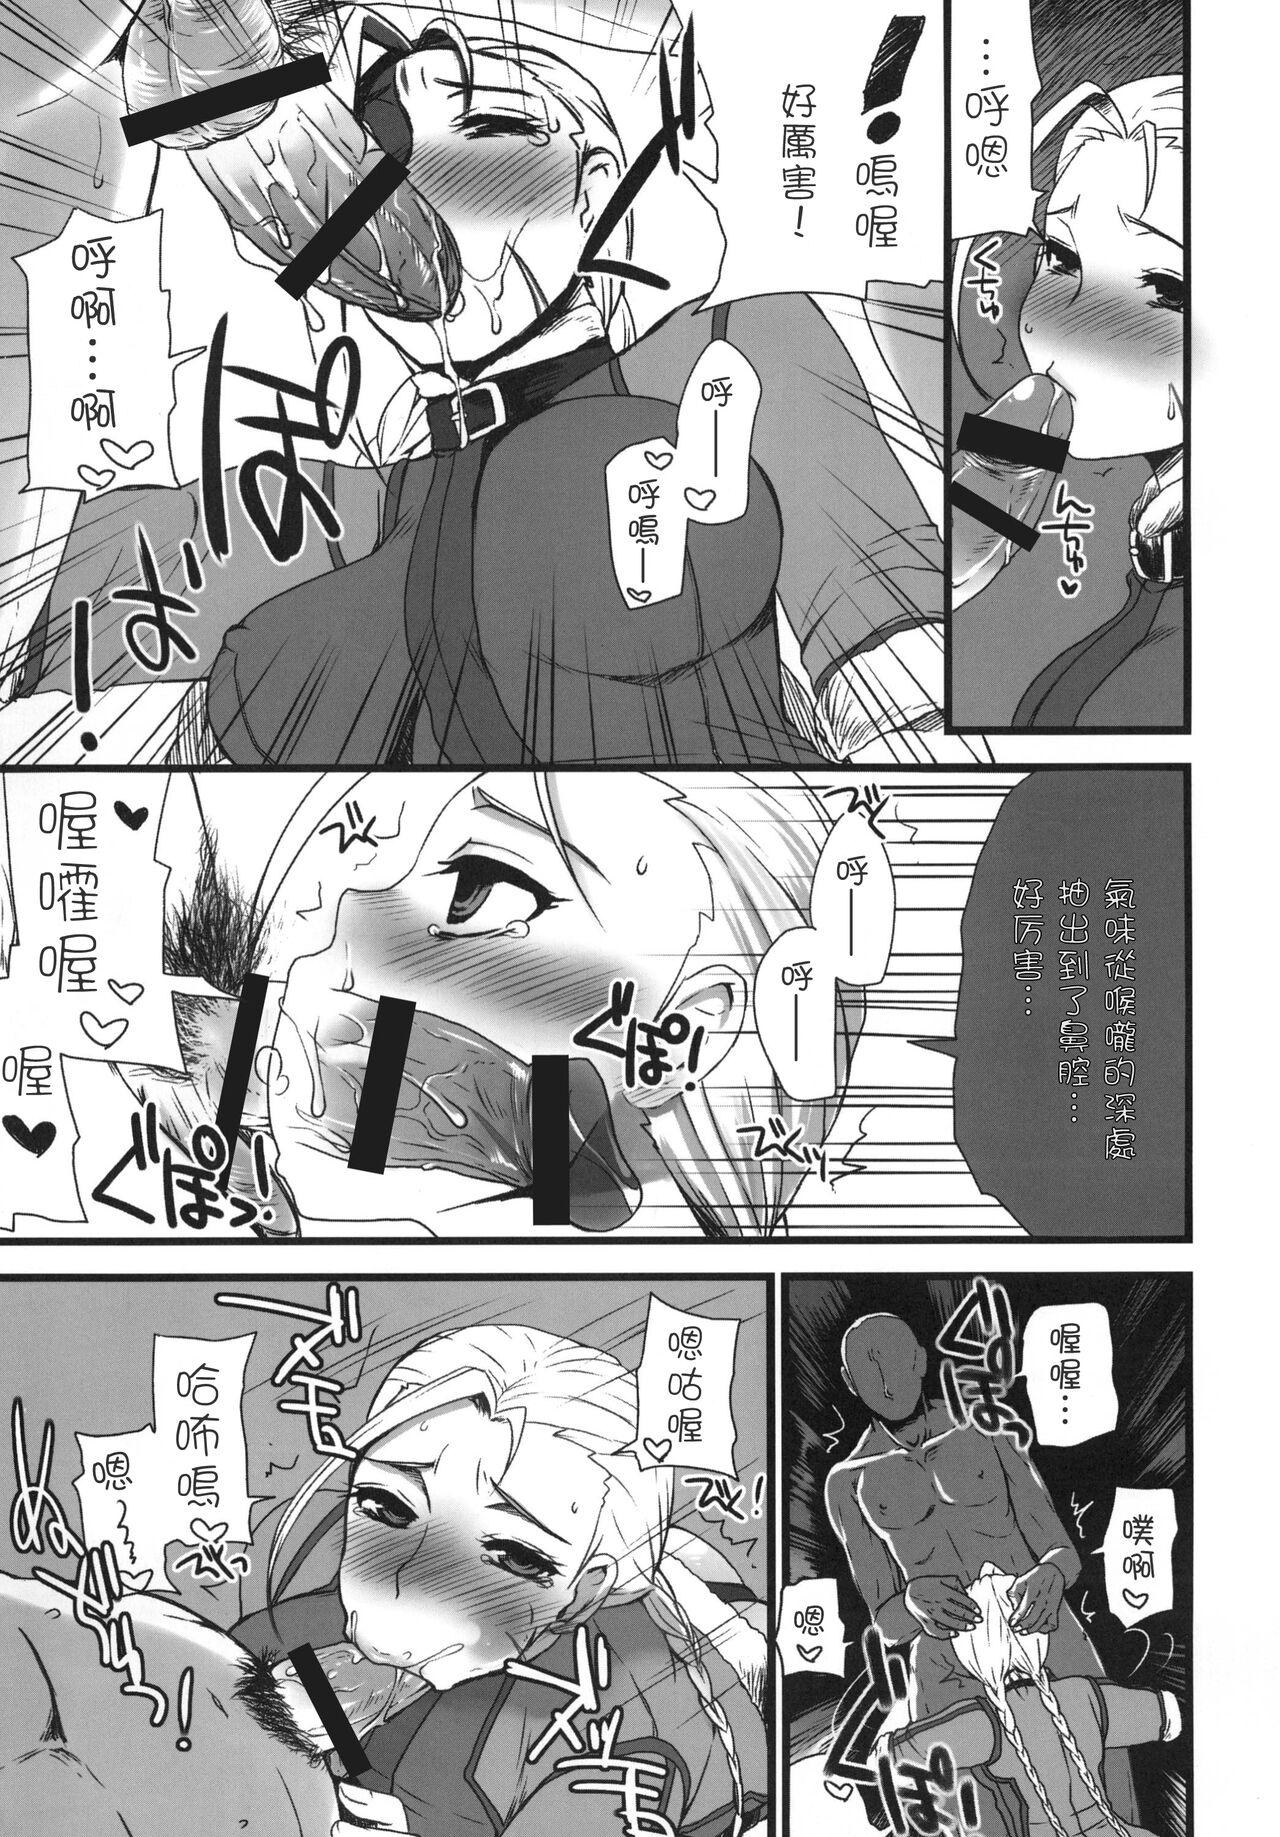 Livecams Mona-Lisa Overdrive | 重啟蒙娜麗莎 - Street fighter Gay Bus - Page 7